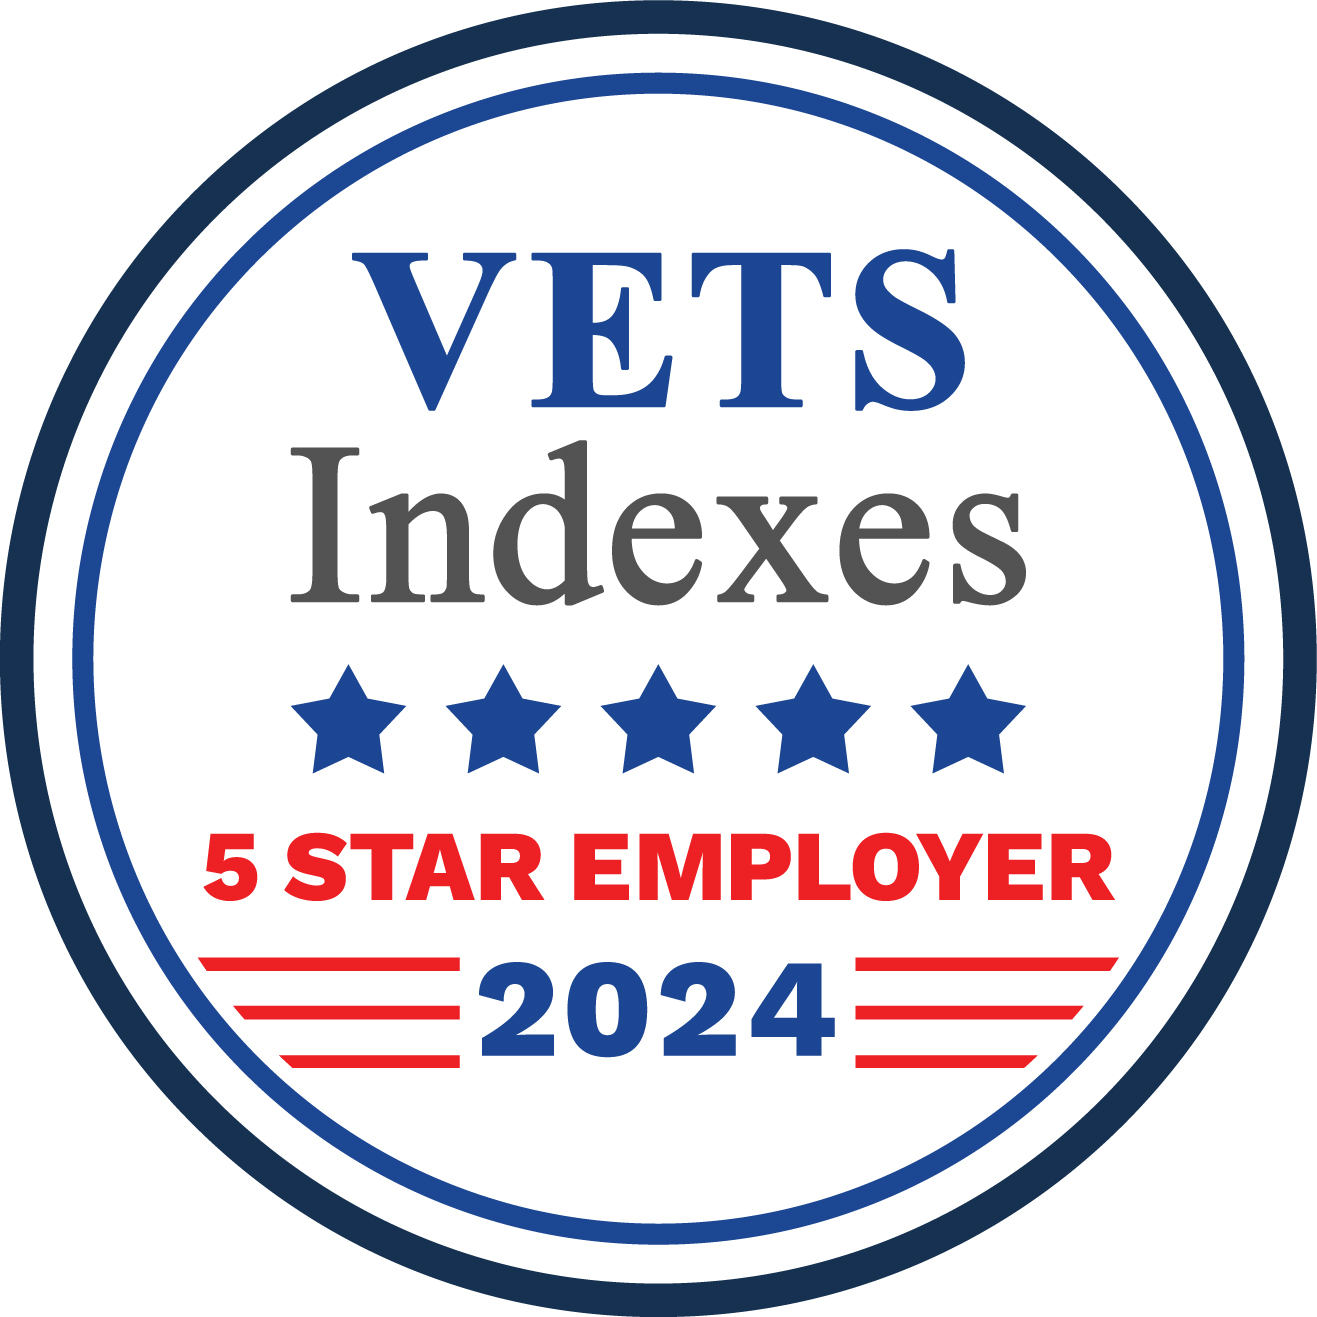 Vets Indexes 5 Star Employer 2024